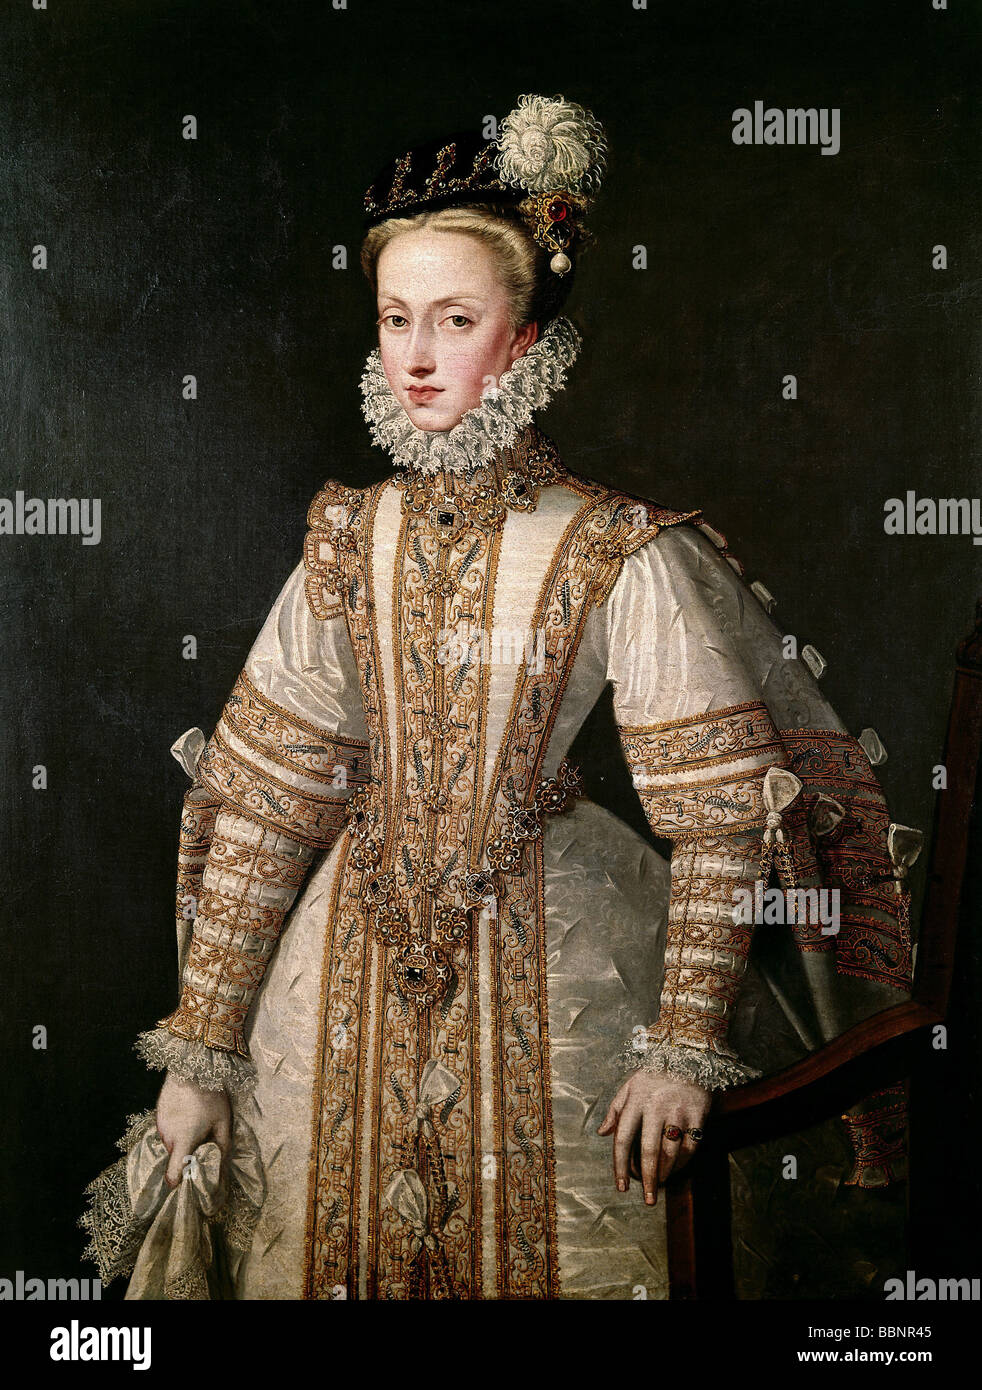 Anna, 2.11.1549 - 26.10.1580, Queen Consort of Spain 12.9.1570 - 26.10.1598, half length, painting by Alonso Sanchez Coello, circa 1575, Lazaro Galdiano, Madrid, Stock Photo